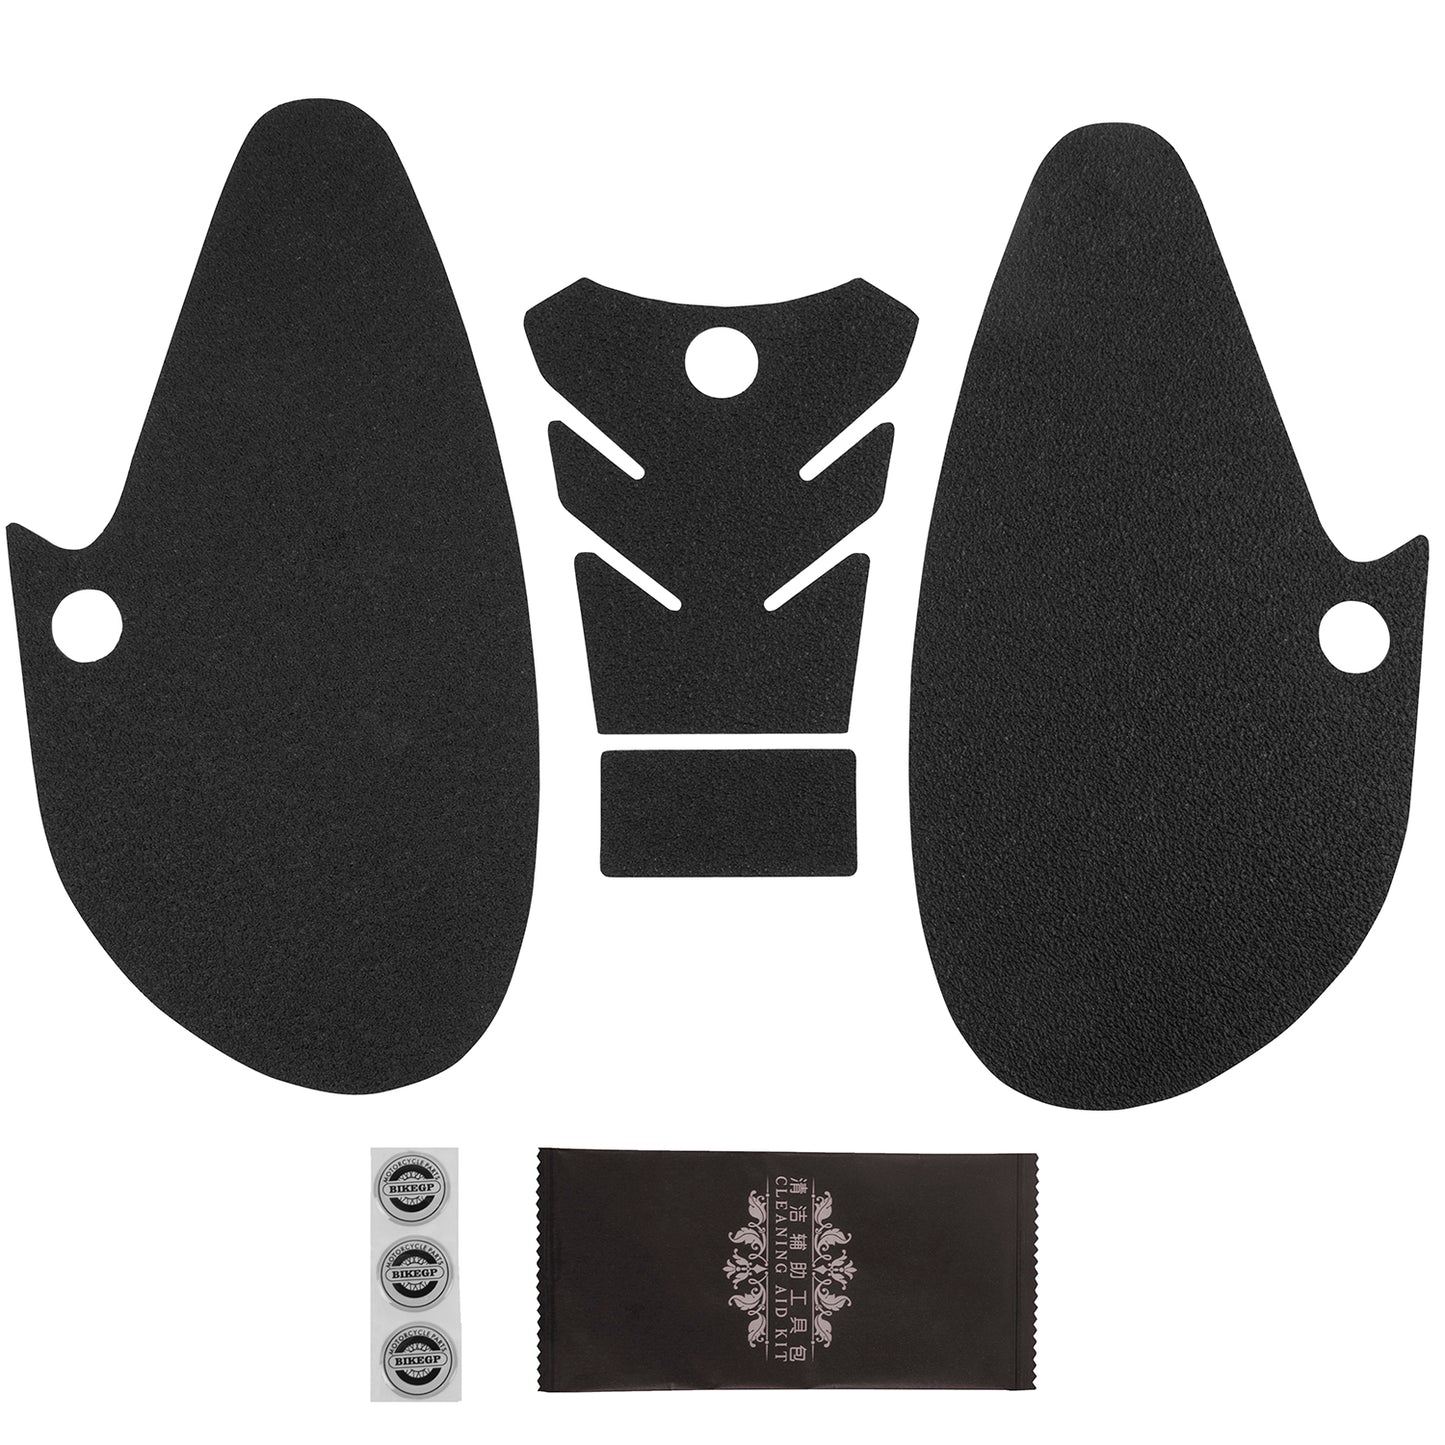 Wolfline Motorcycle Accessories Anti Slip Tank Pad Stickers Side Gas Tank Pad Knee Grip Decals Protection For Yamaha YZF-R3 YZFR3 YZF R3 2019 2020 2021 2022